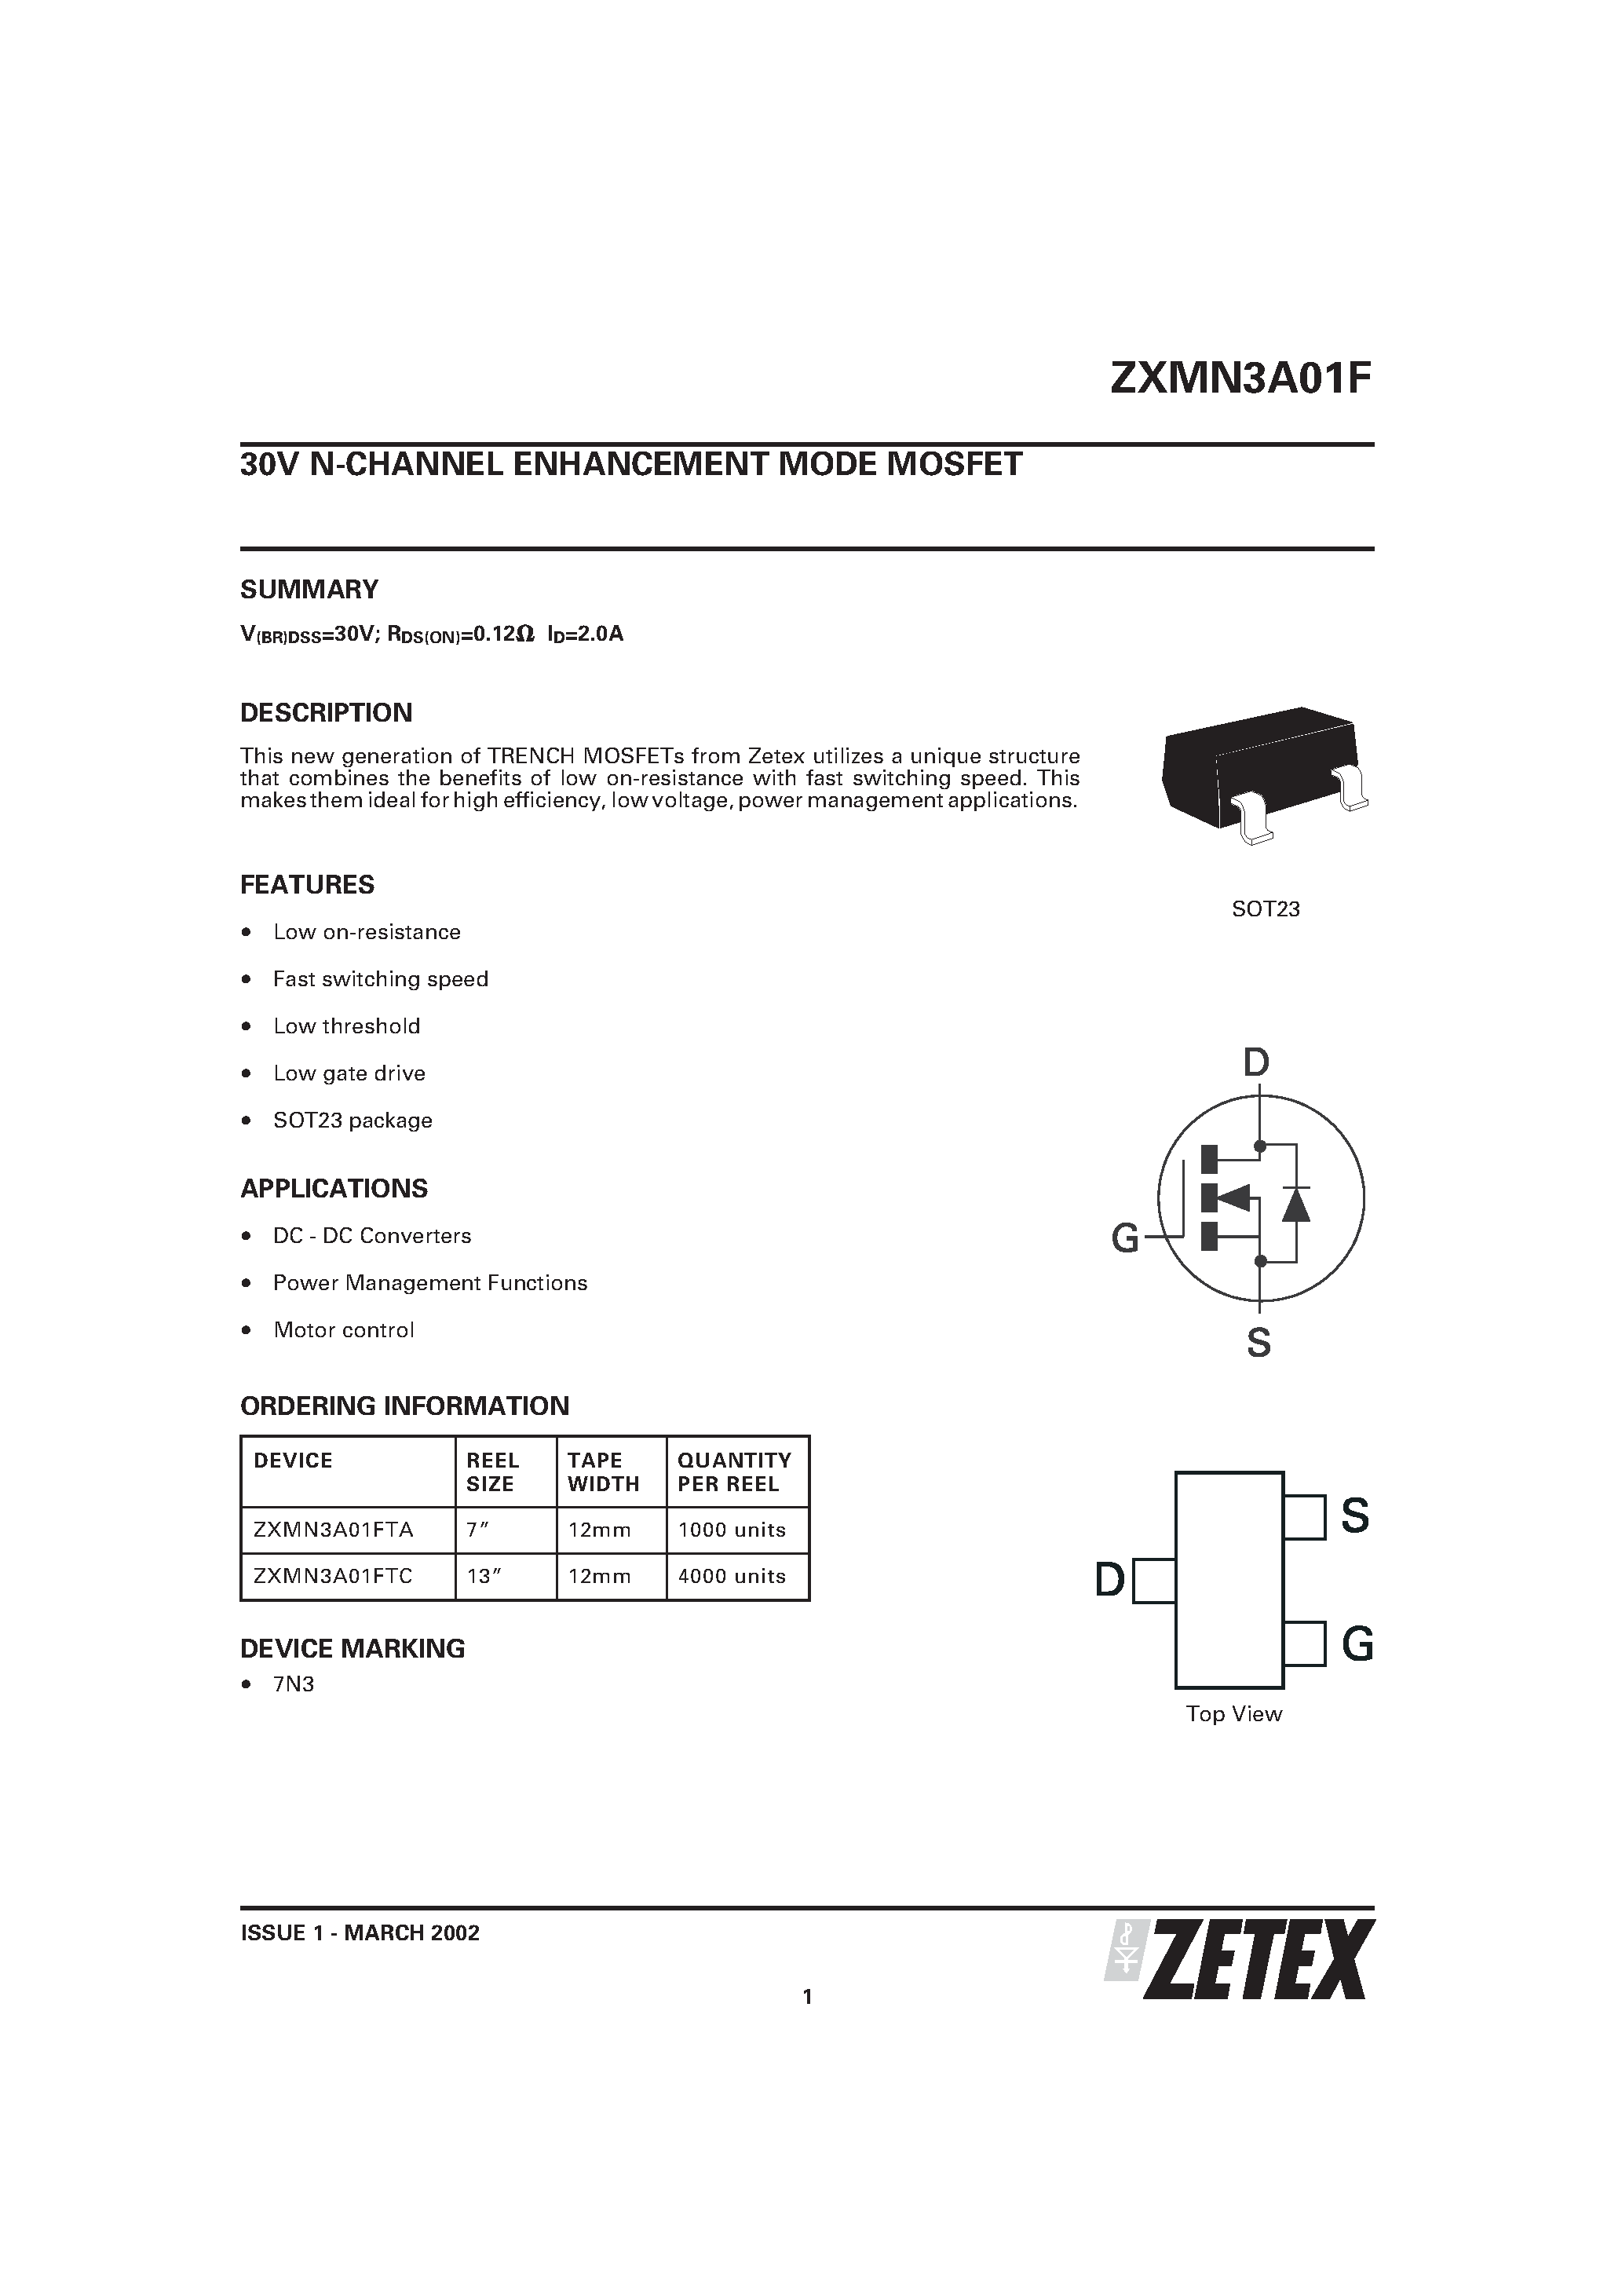 Datasheet ZXMN3A01F - 30V N-CHANNEL ENHANCEMENT MODE MOSFET page 1